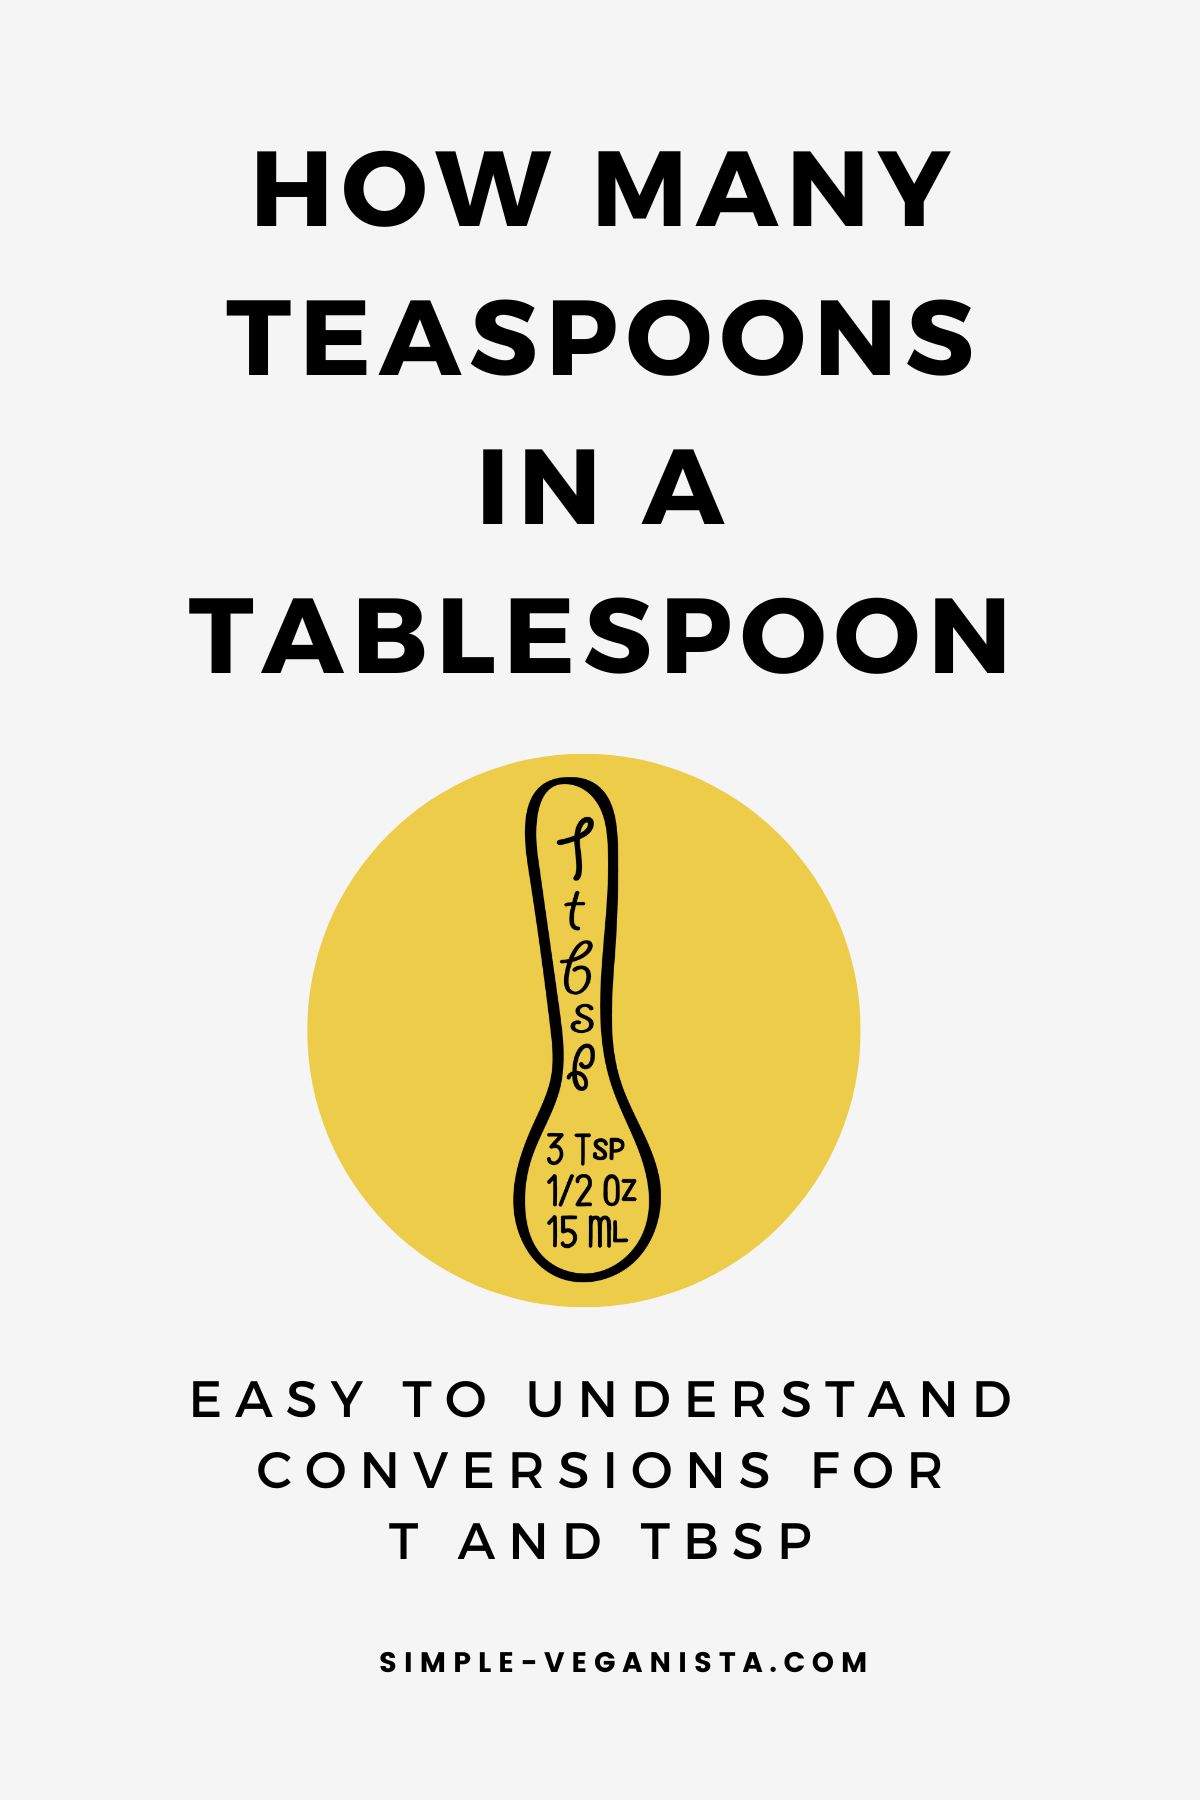 teaspoons in a tablespoon intro graphic.